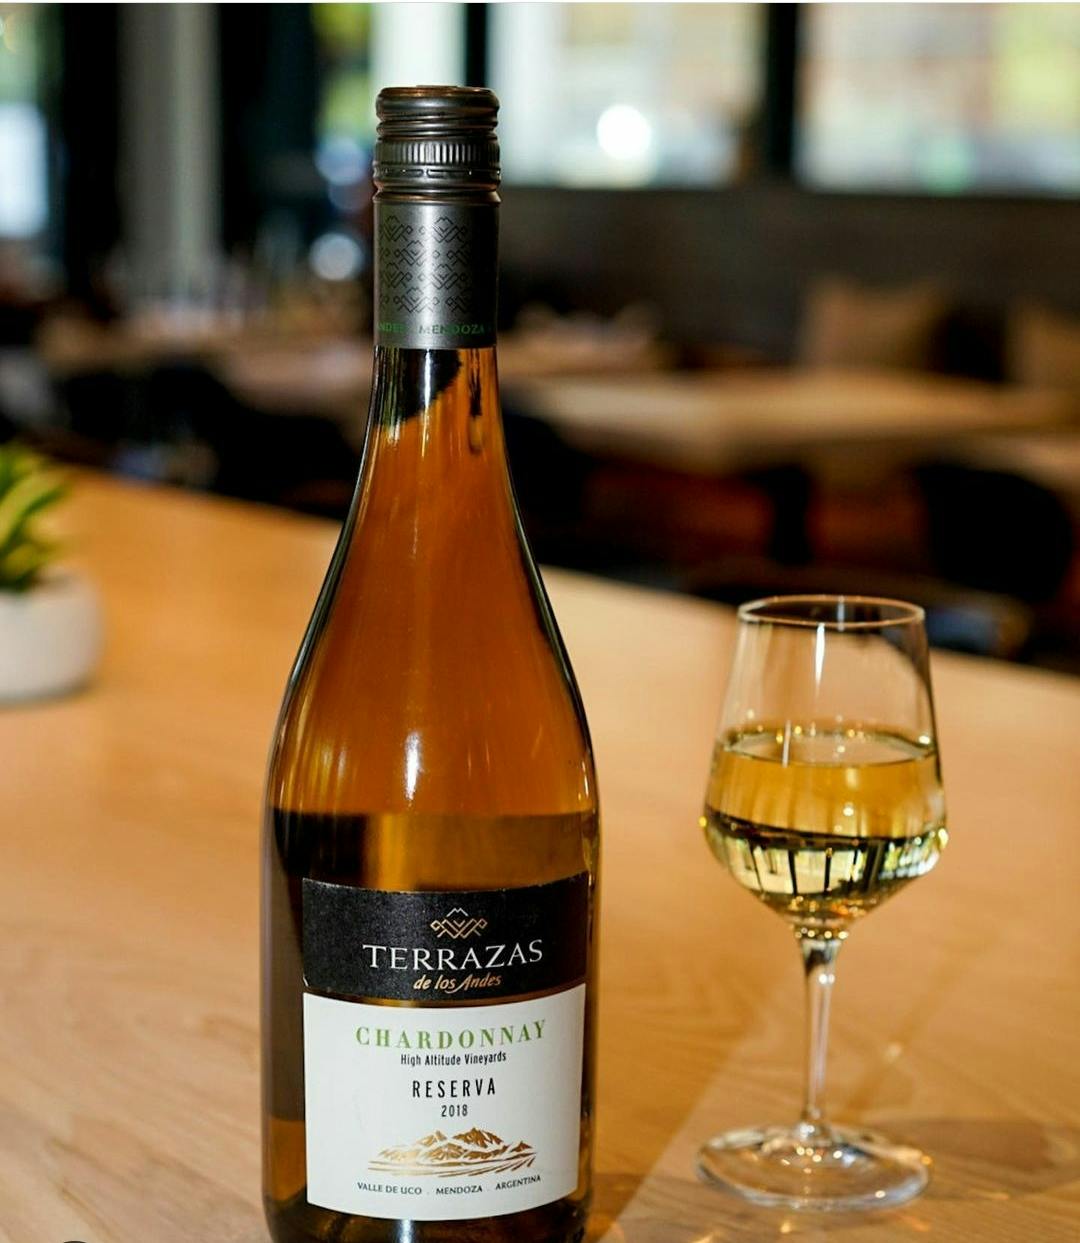 a close up of a bottle of chardonnay wine on a table